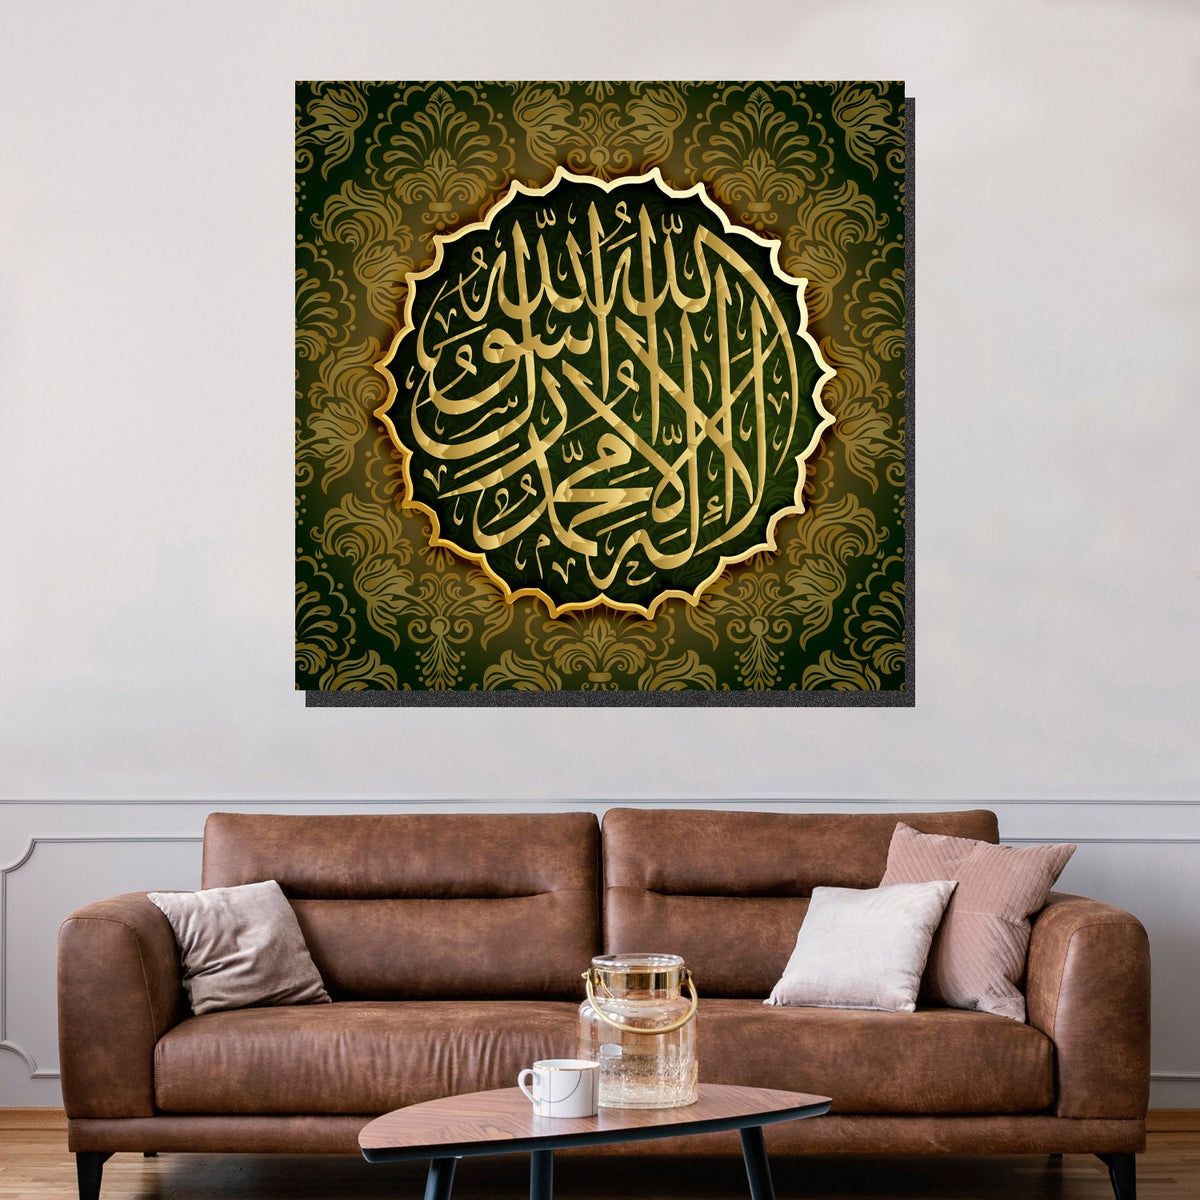 https://cdn.shopify.com/s/files/1/0387/9986/8044/products/BlessedJumahCanvasArtprintStretched-1.jpg